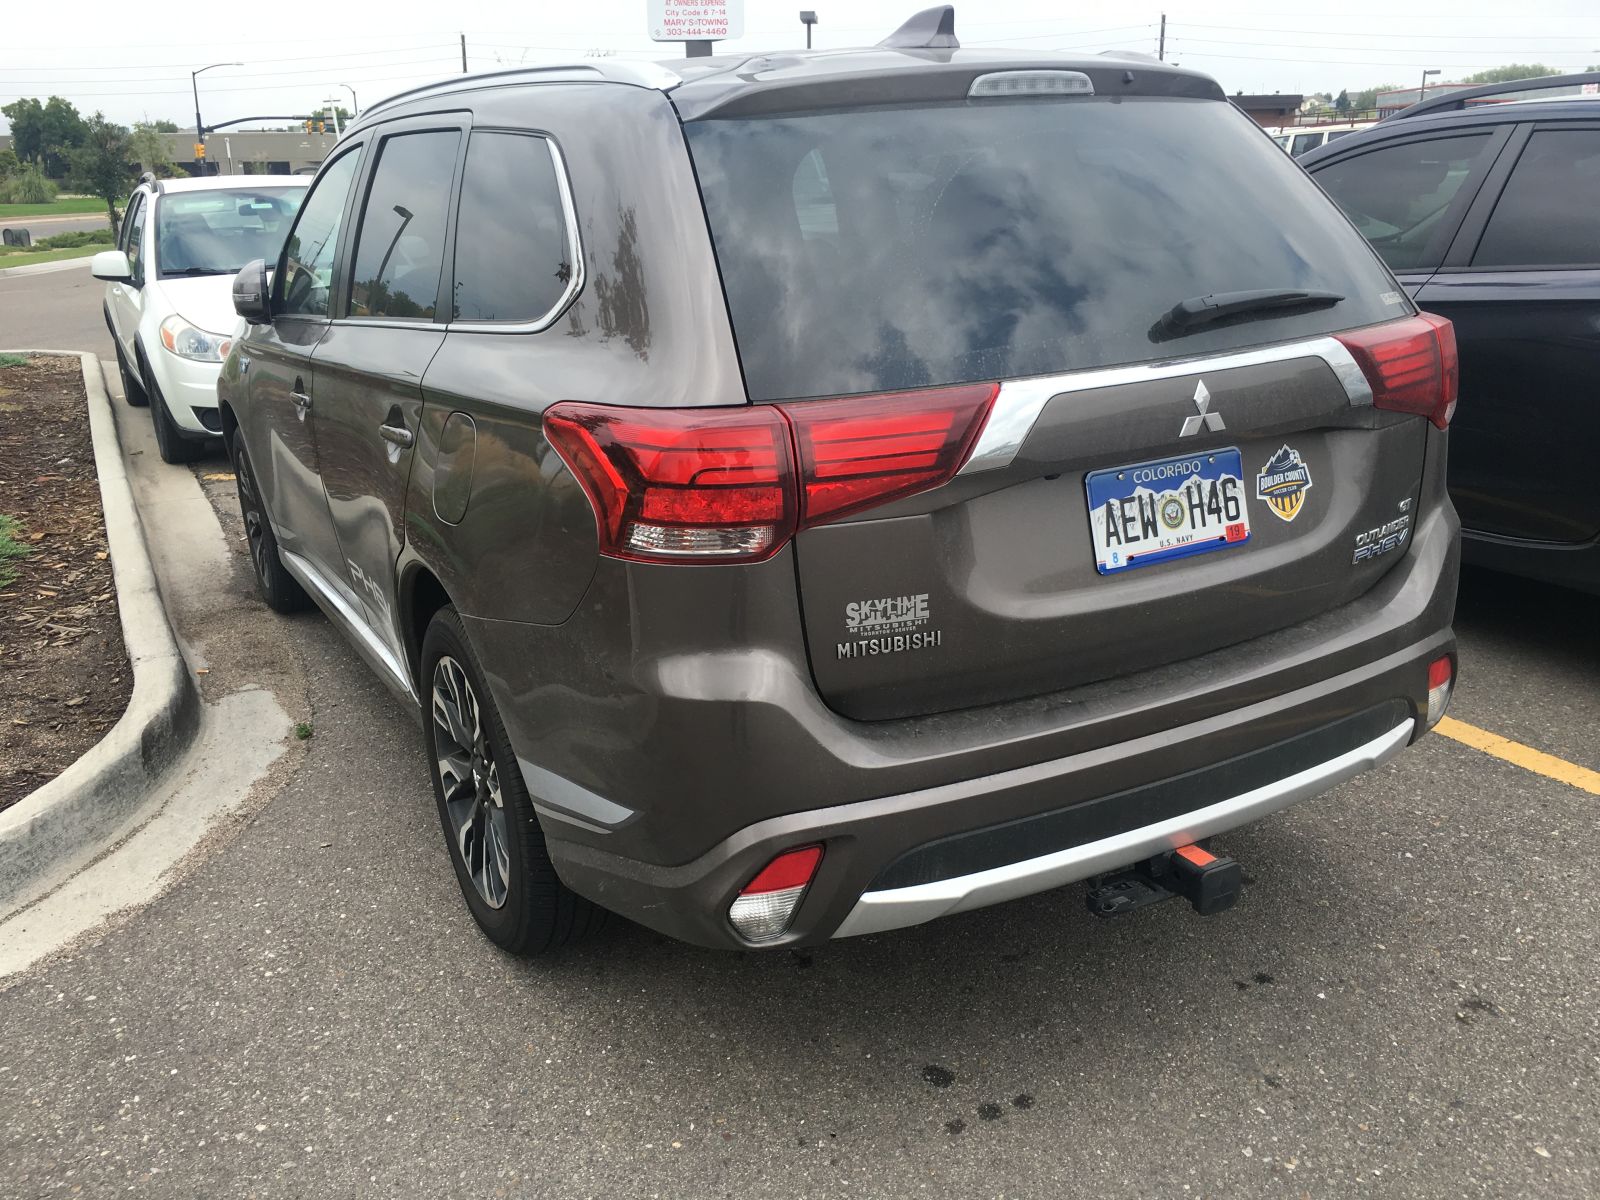 Mitsubishi Outlander plug-in hybrid. Someone actually bought this.